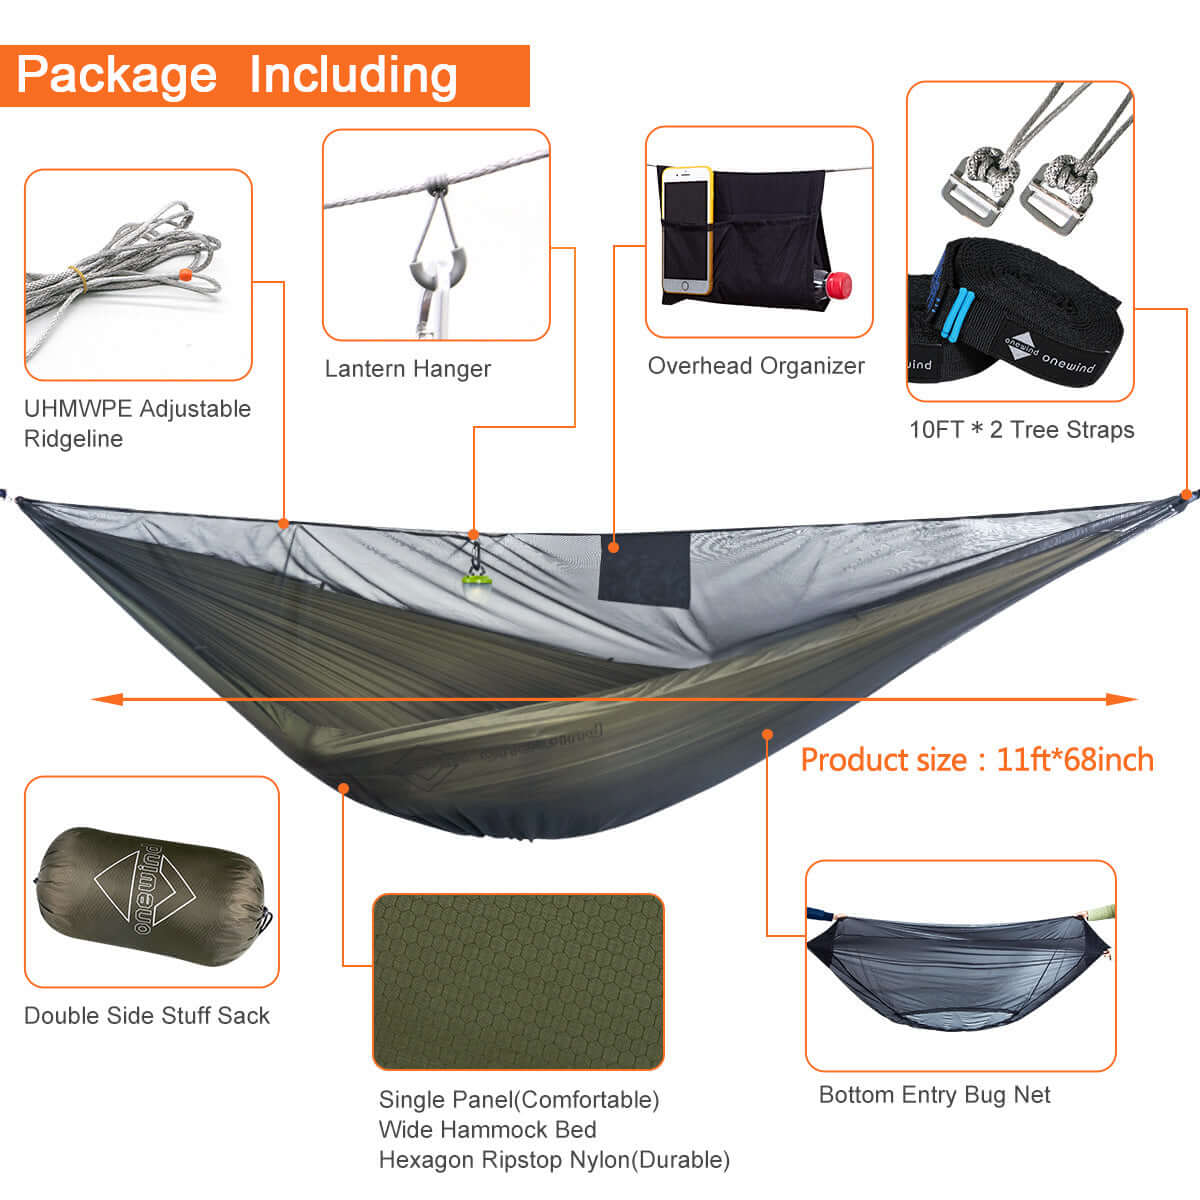 Camping Hammock with Accessories | Onewind Outdoors